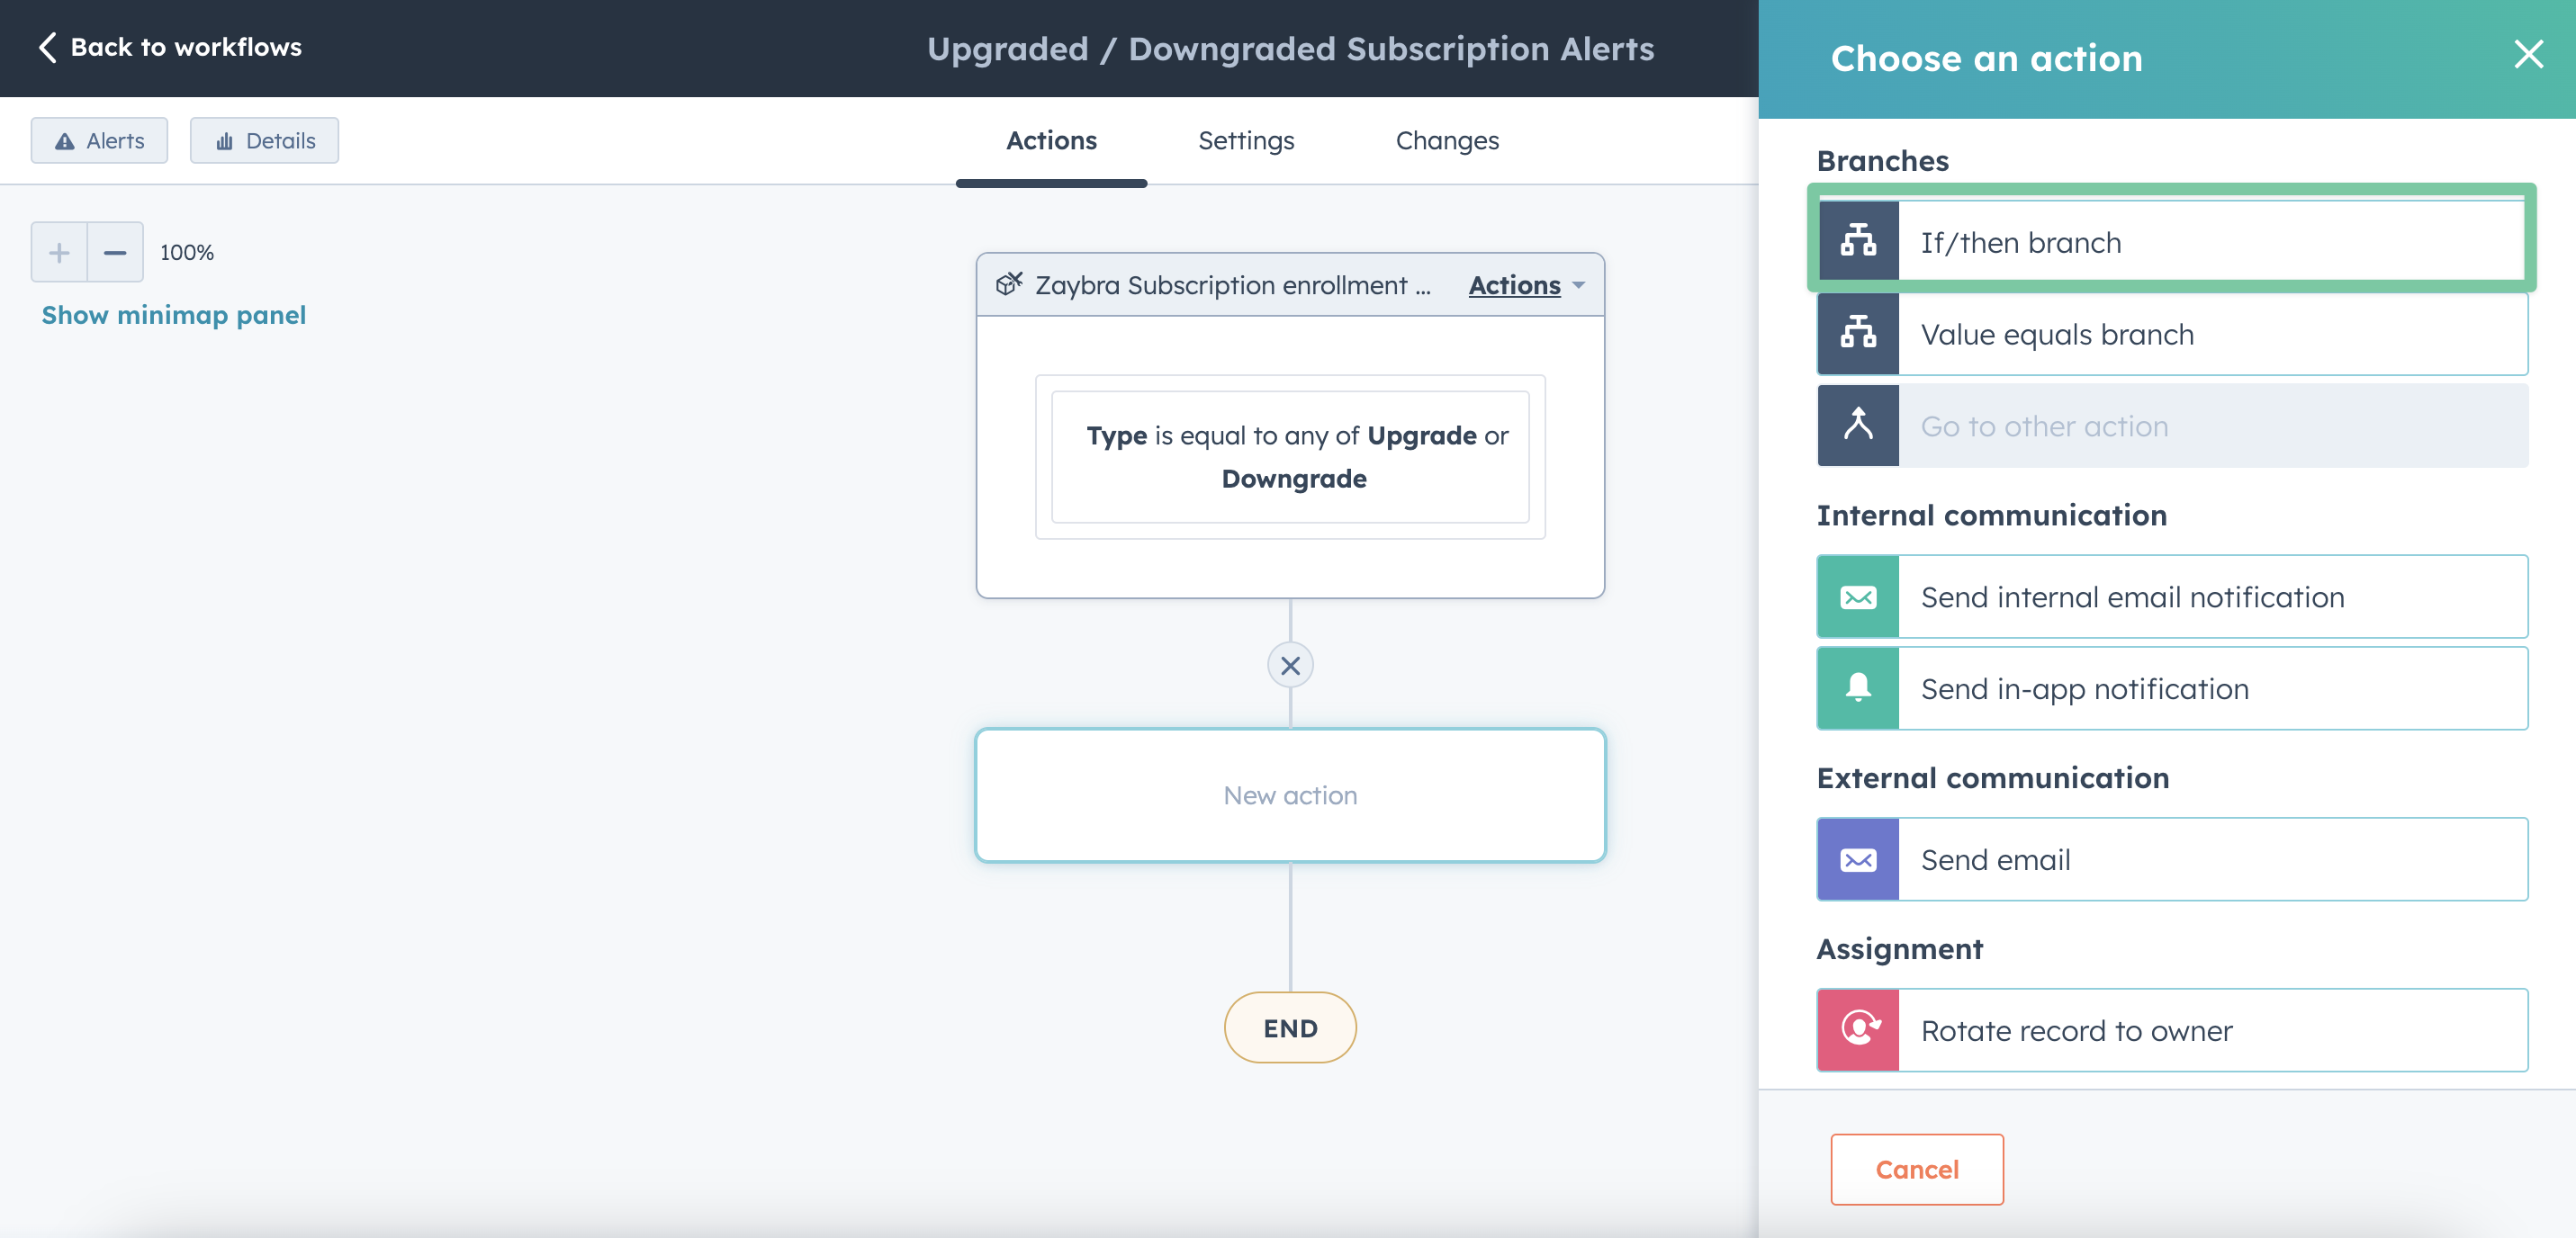 How to create subscription change alerts in HubSpot